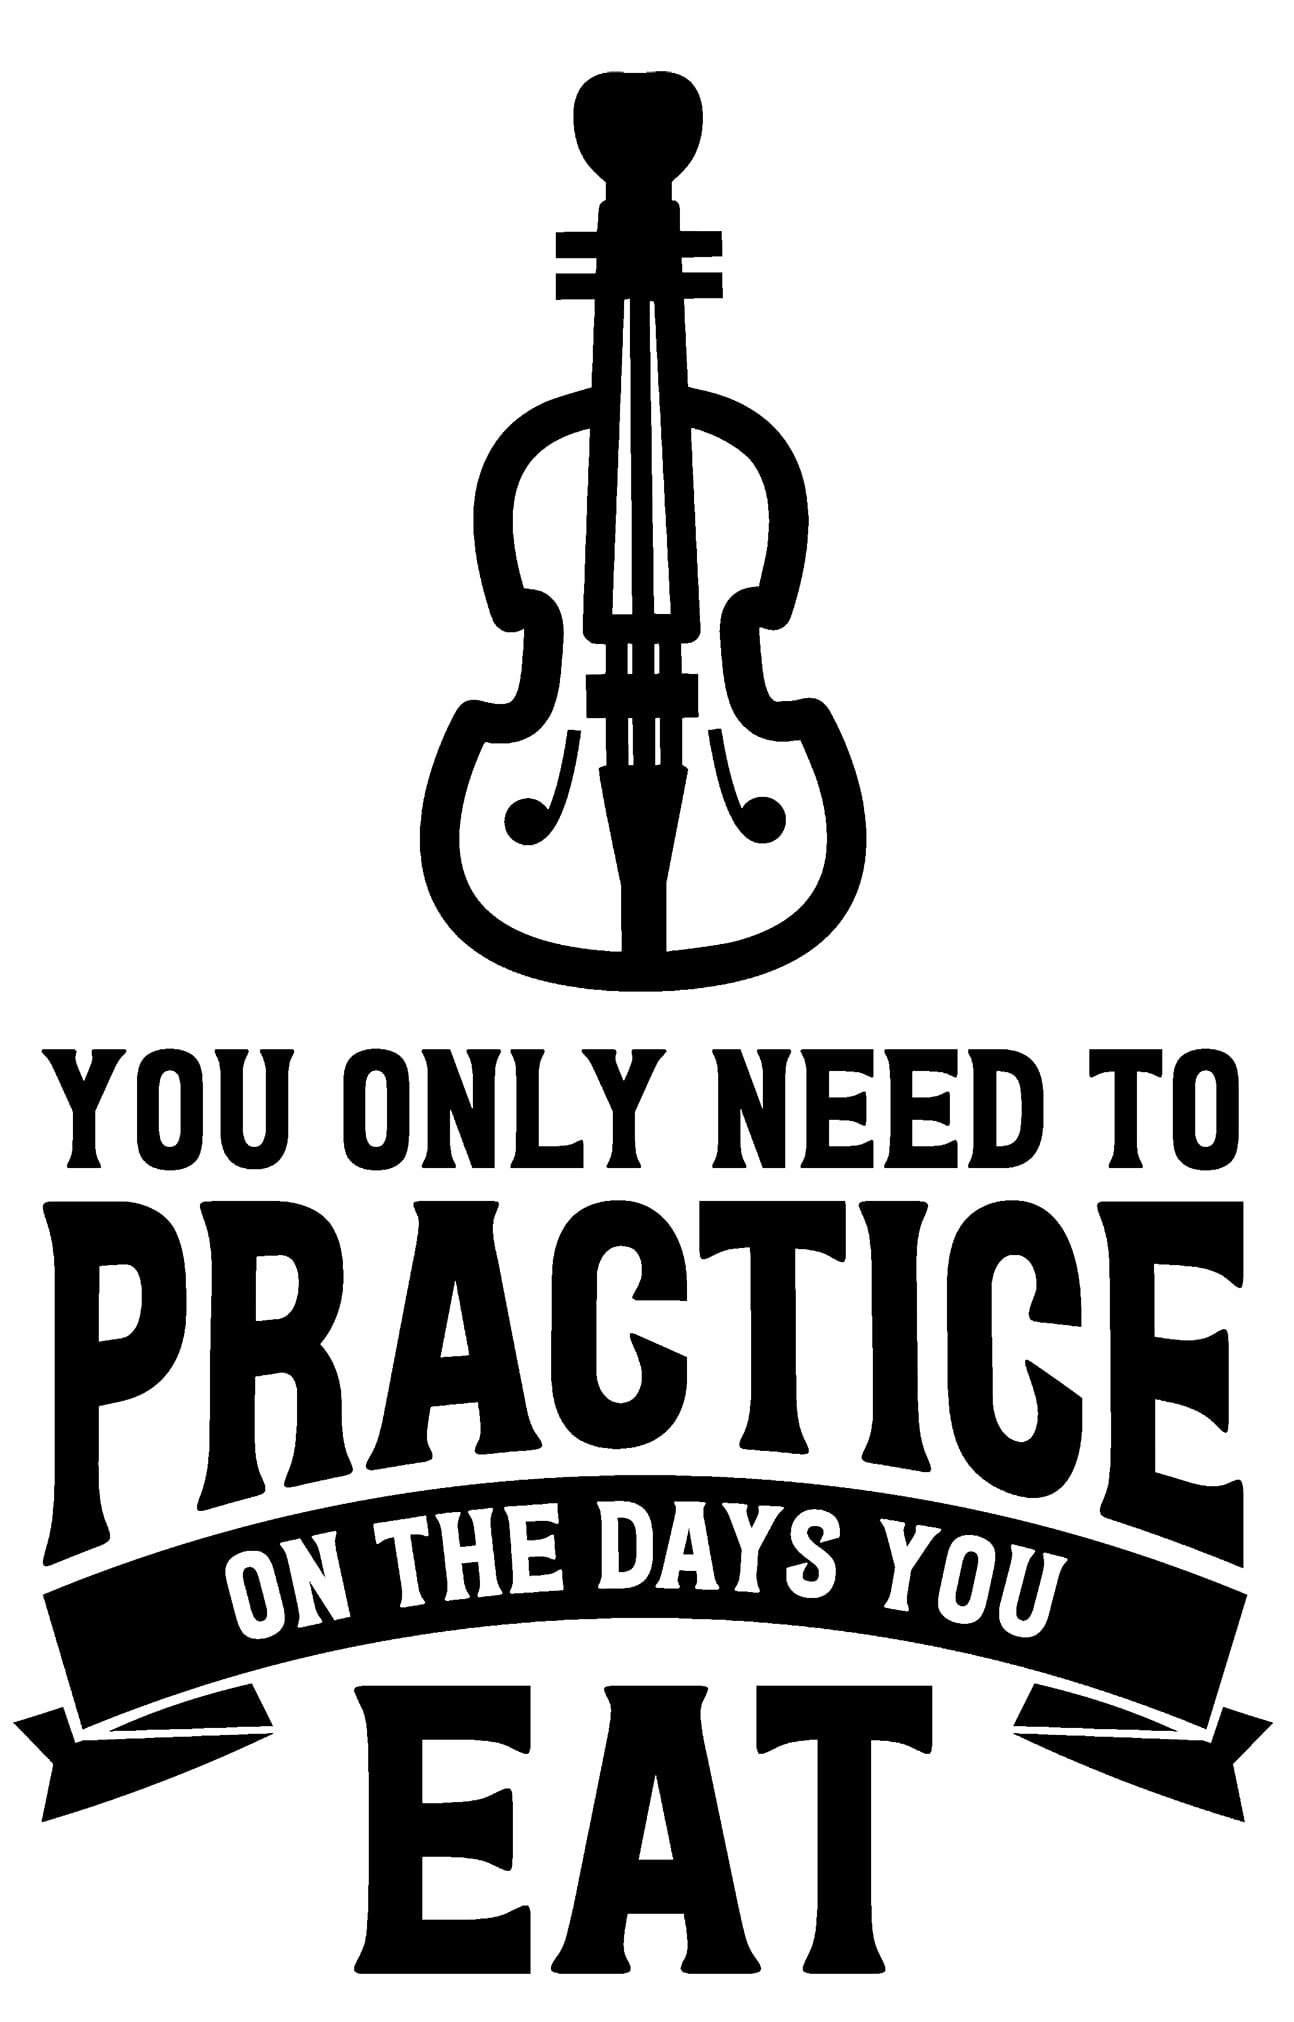 You Only Need To Practice On The Days You Eat Funny Violin Wall Decals for  Walls Peel and Stick wall art murals Black Medium 18 Inch 